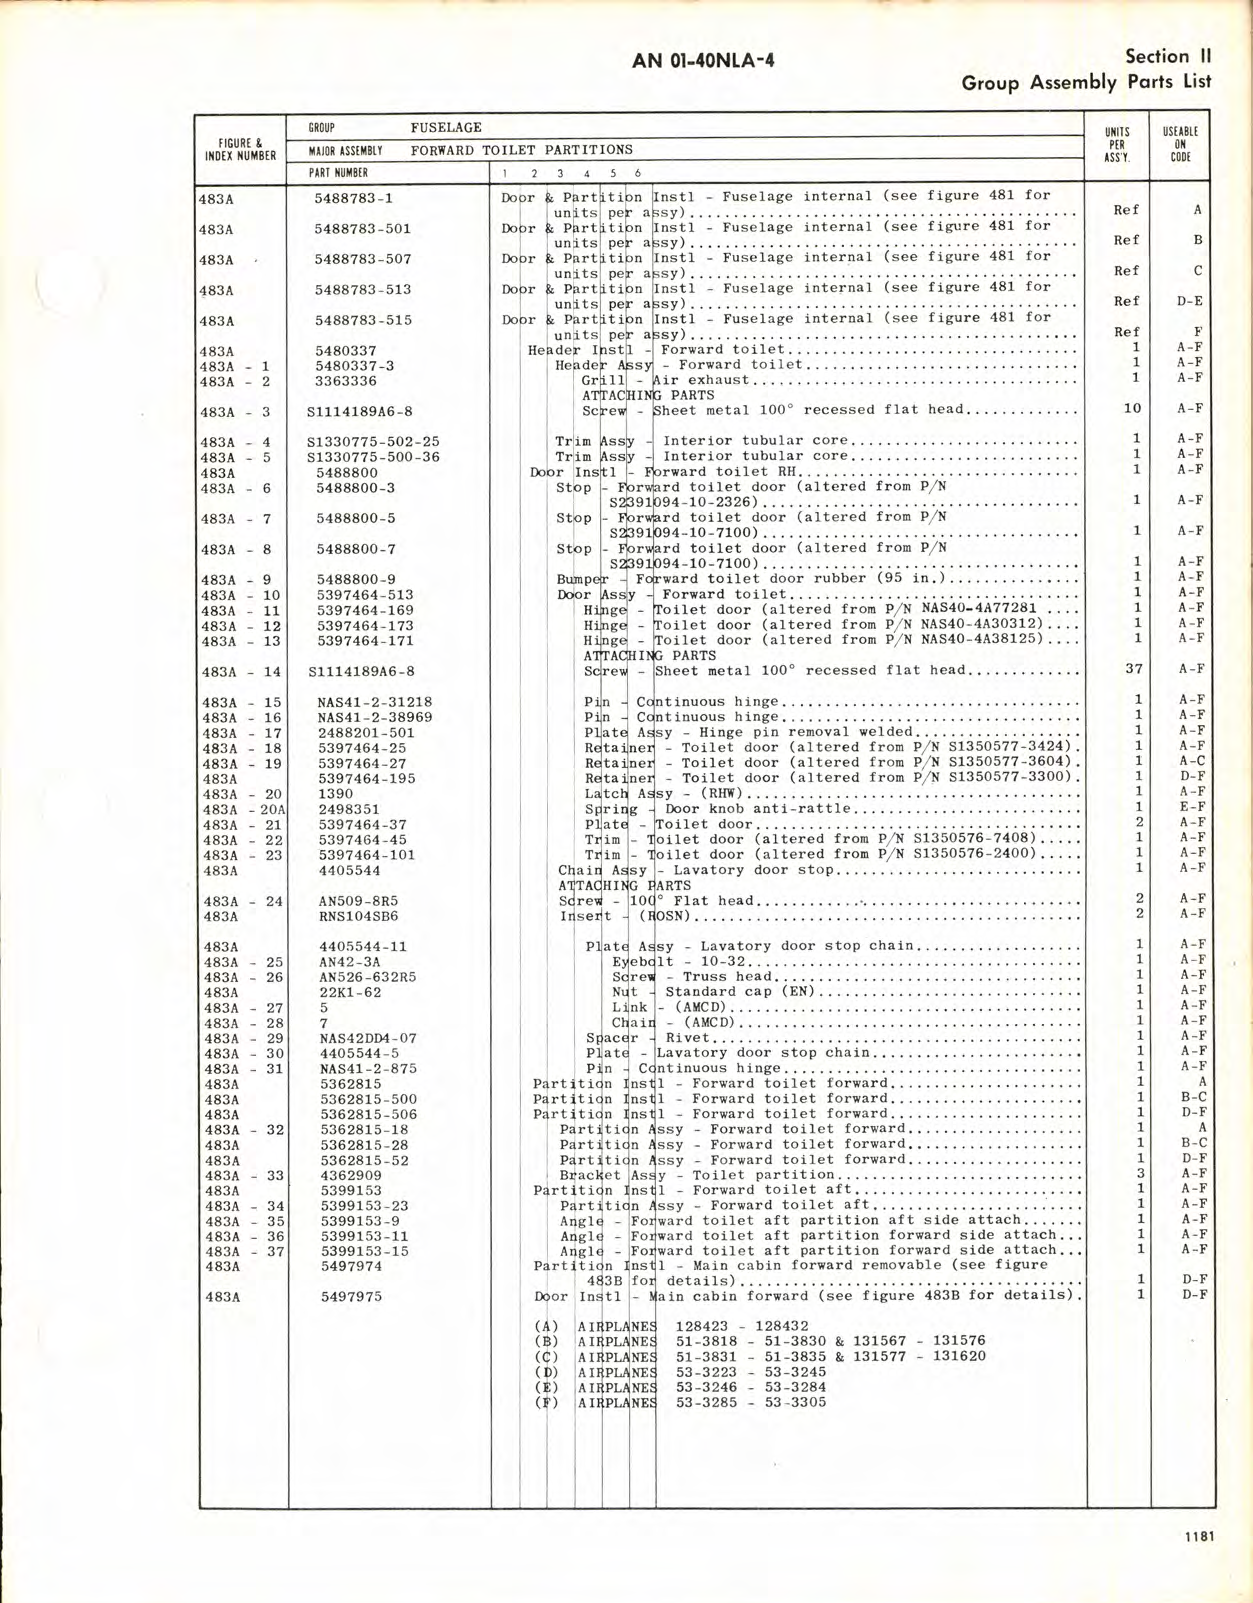 Sample page 7 from AirCorps Library document: Parts Catalog for DC-6 Series